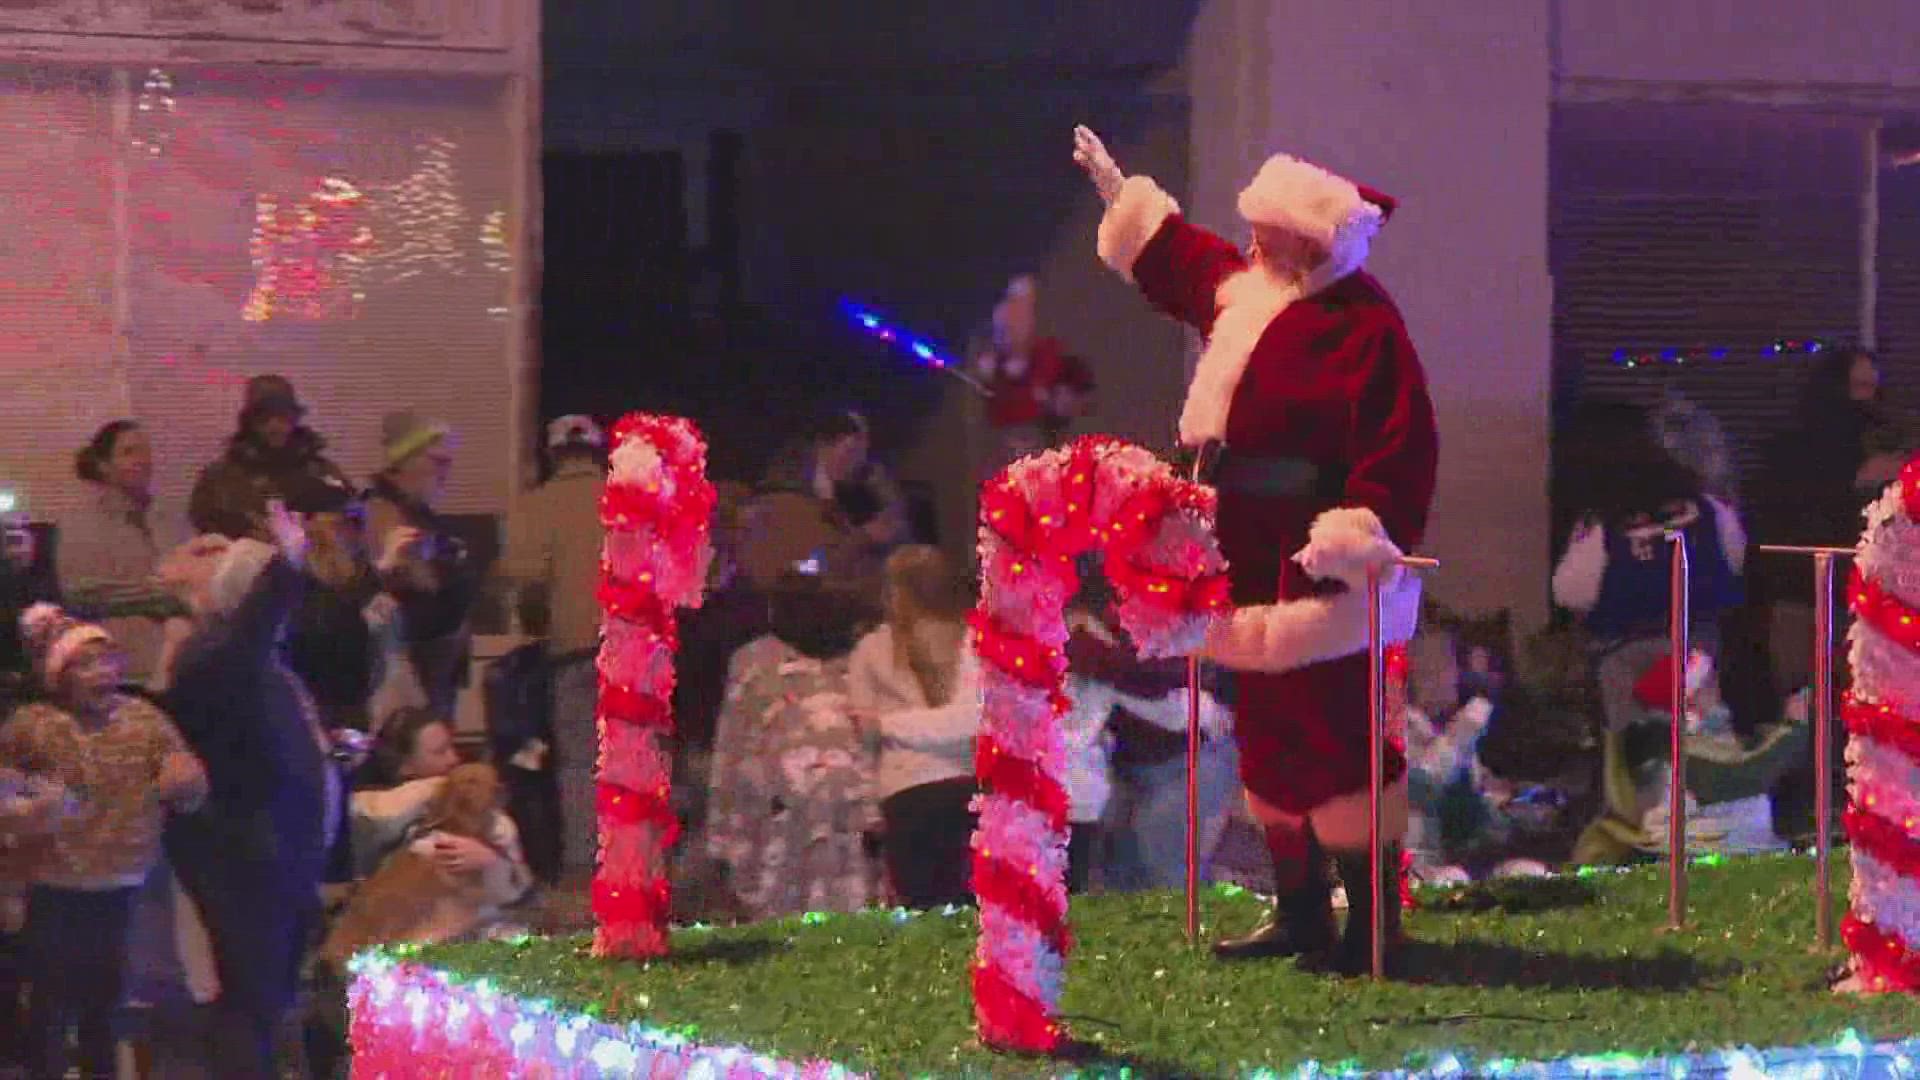 This year marks the City of Temple's 75th Annual Christmas Parade!